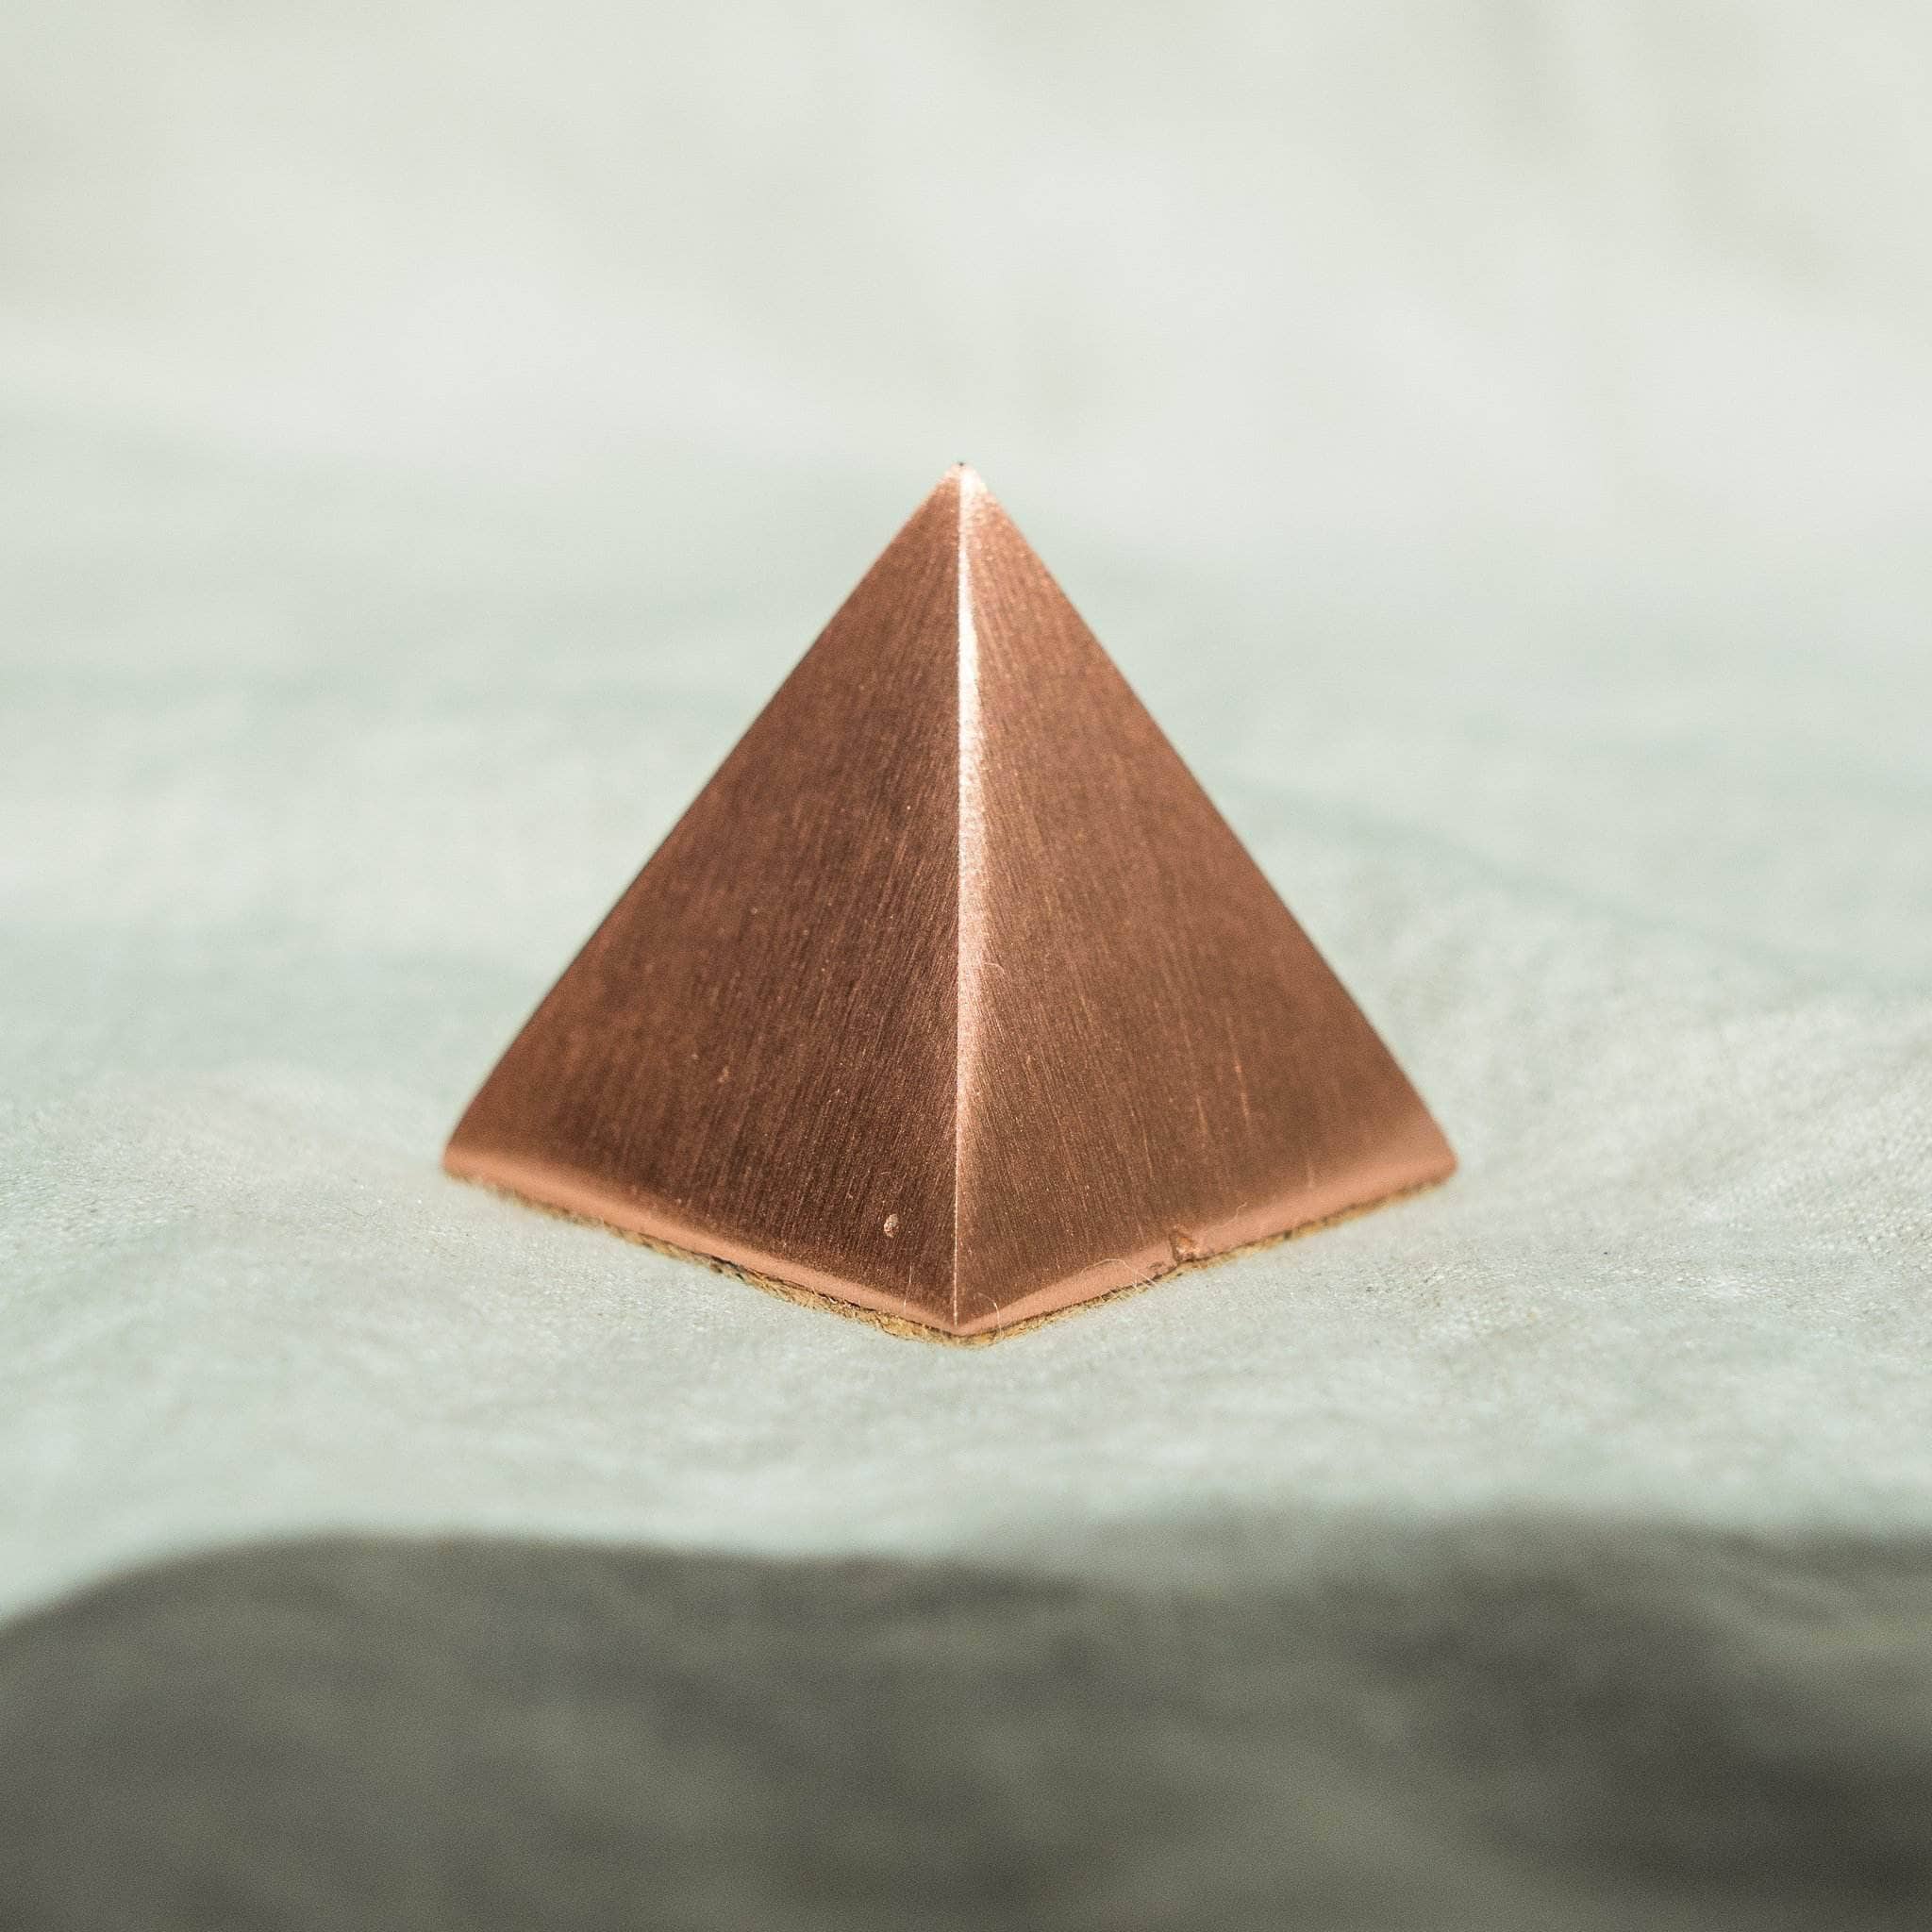 Electroculture new 100% copper pyramid kit to build up to 3 m or 9 feet  size big pyramids or more 